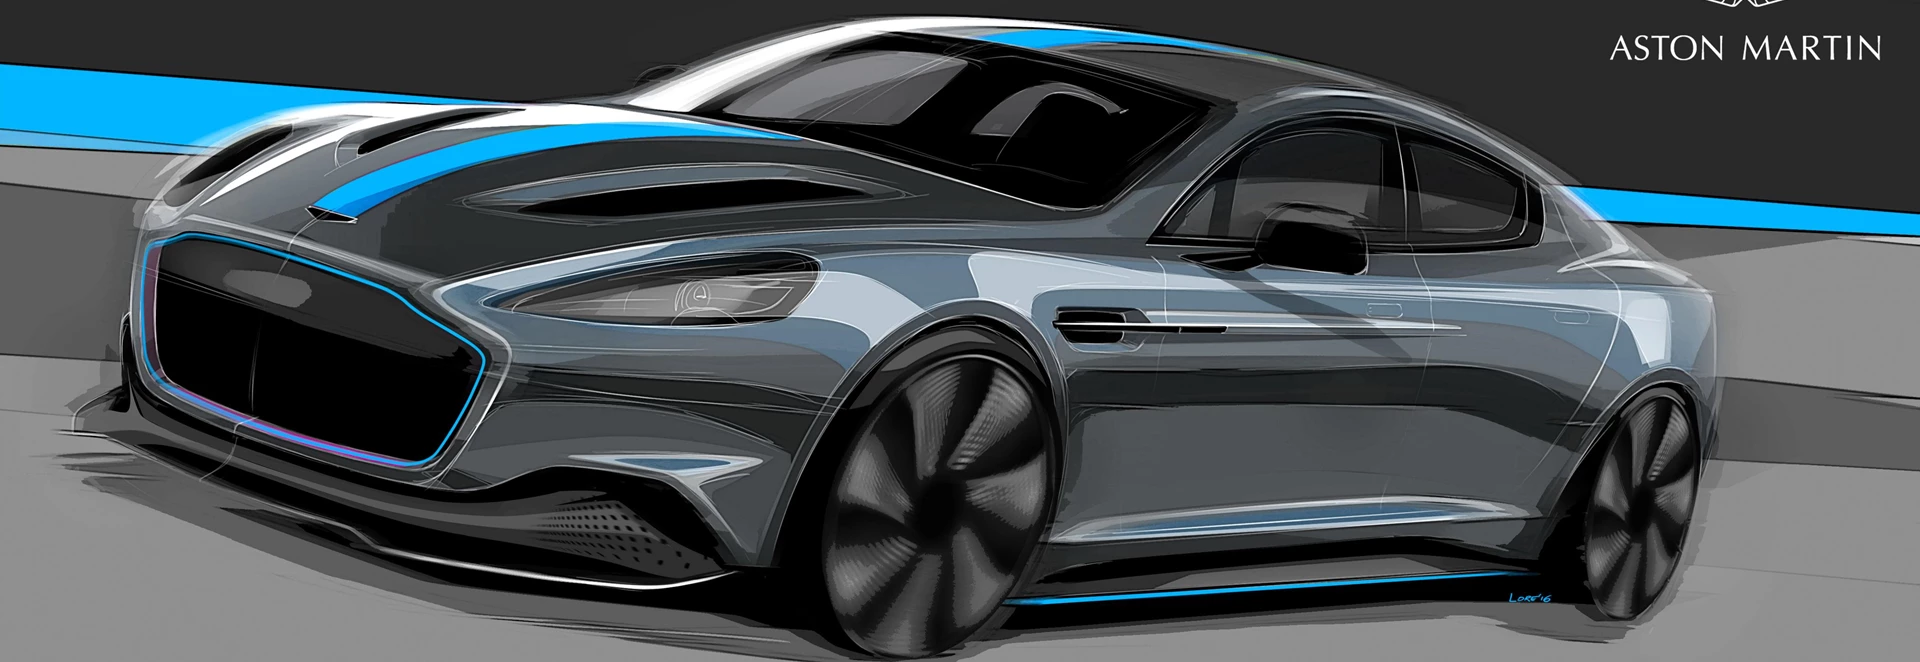 2019 Aston Martin RapidE: First look at Aston’s first-ever all-electric car 